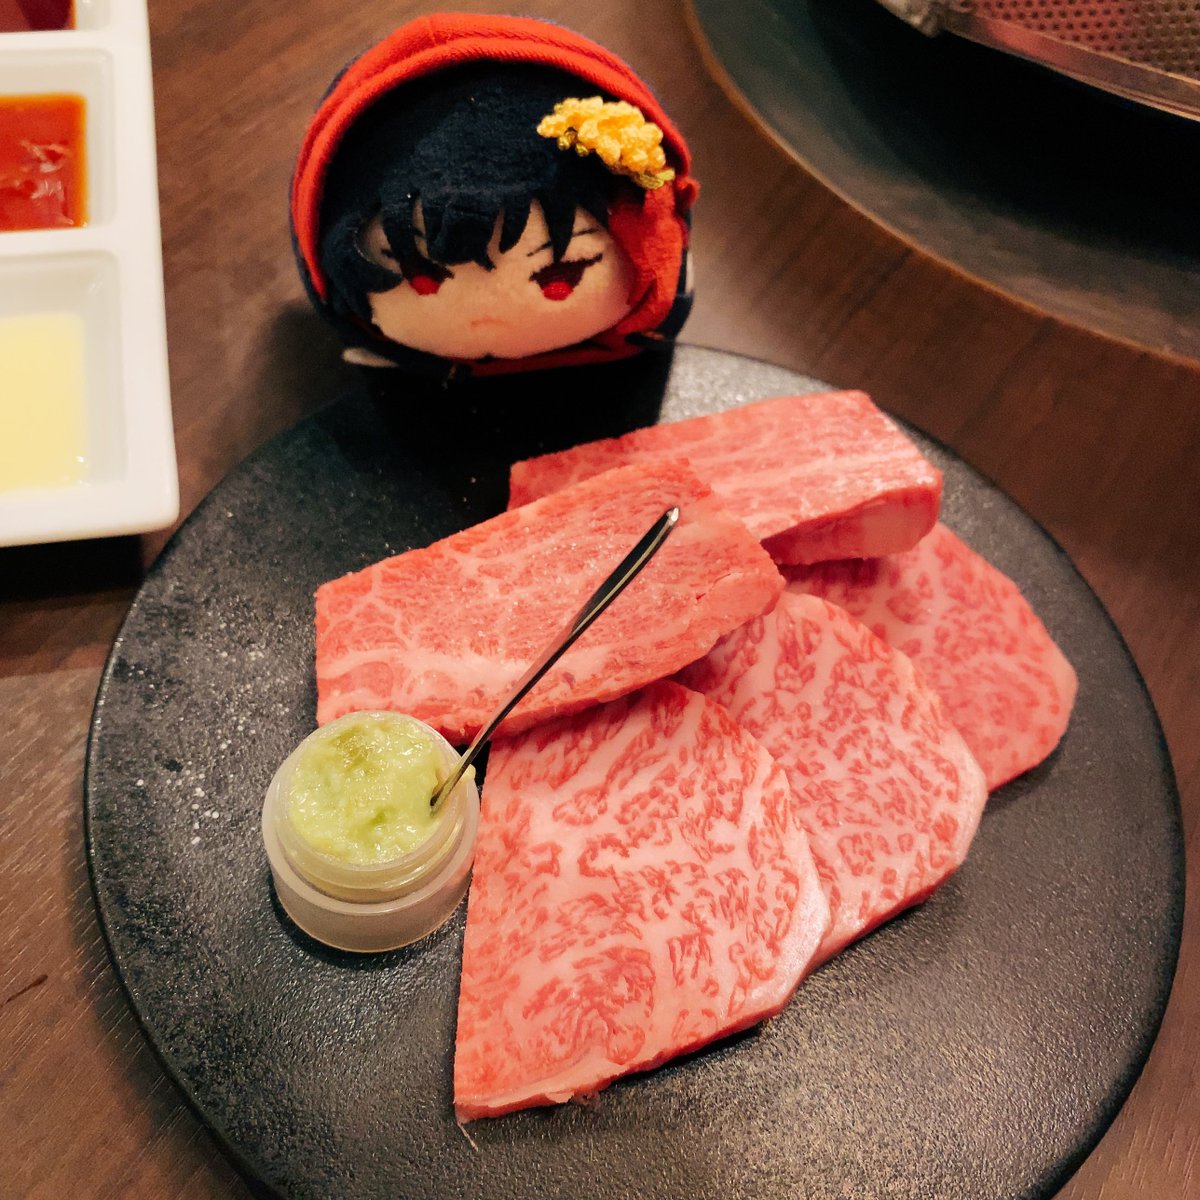 red eyes food black hair solo plate meat red hair  illustration images